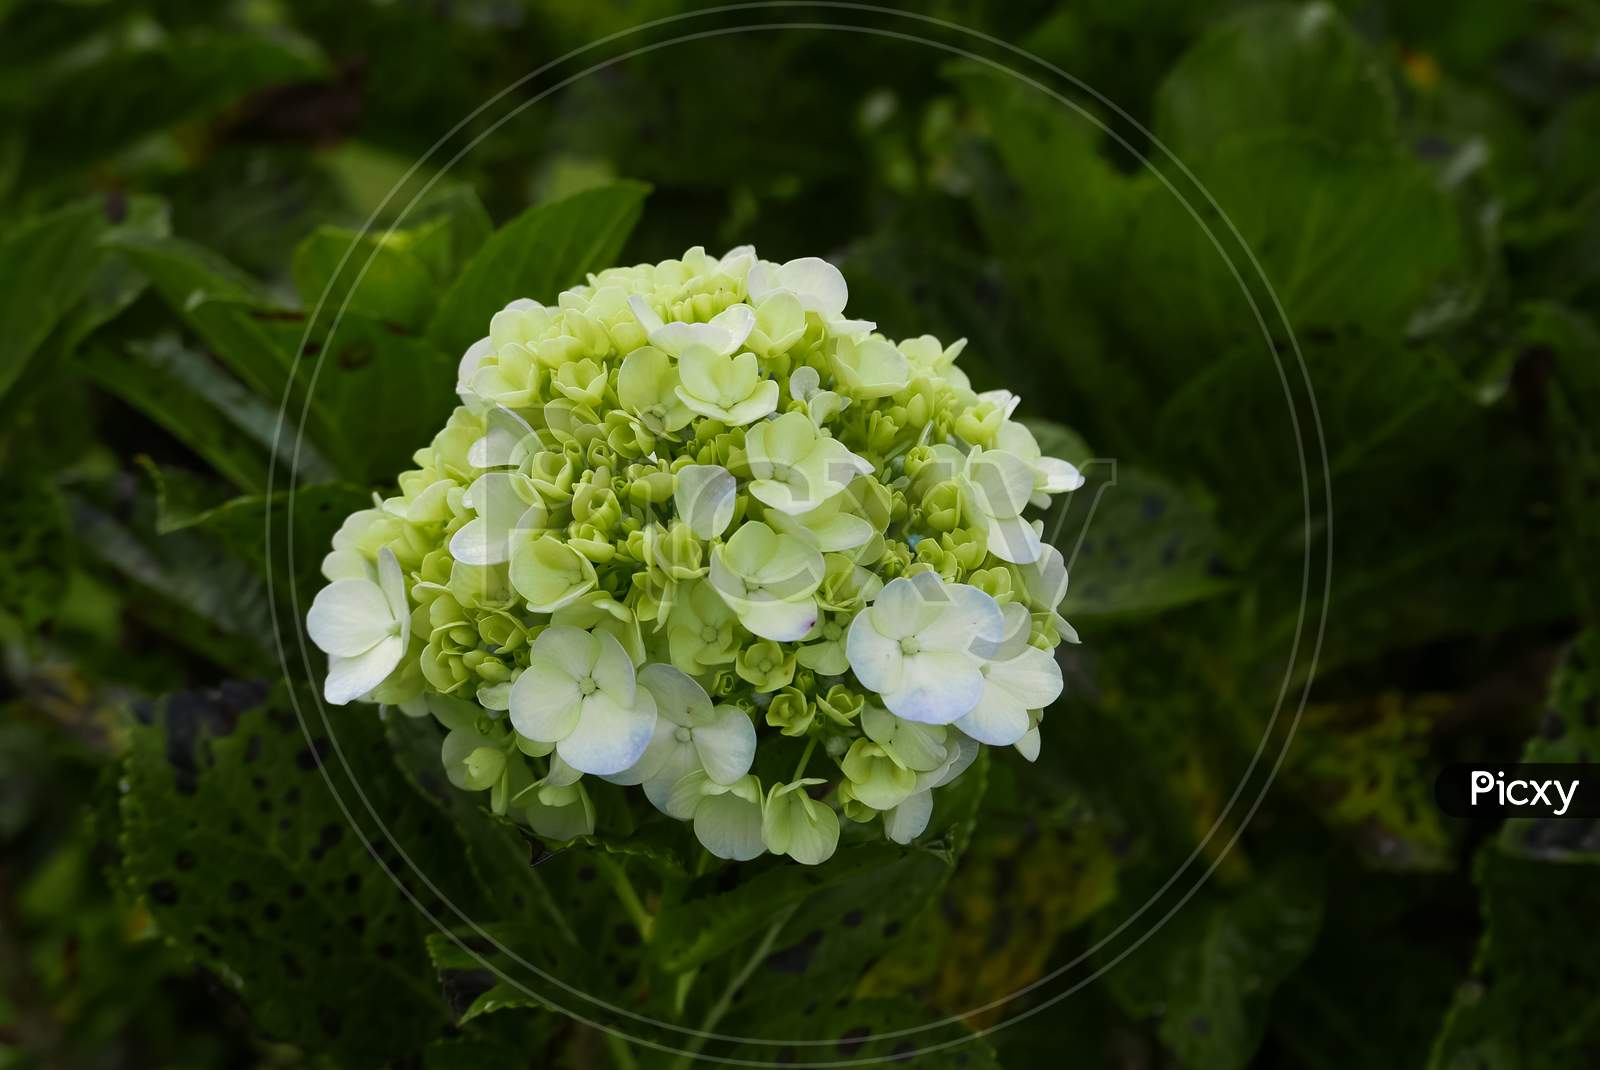 Hydrangea flower blooming in spring and summer in a garden outdoor